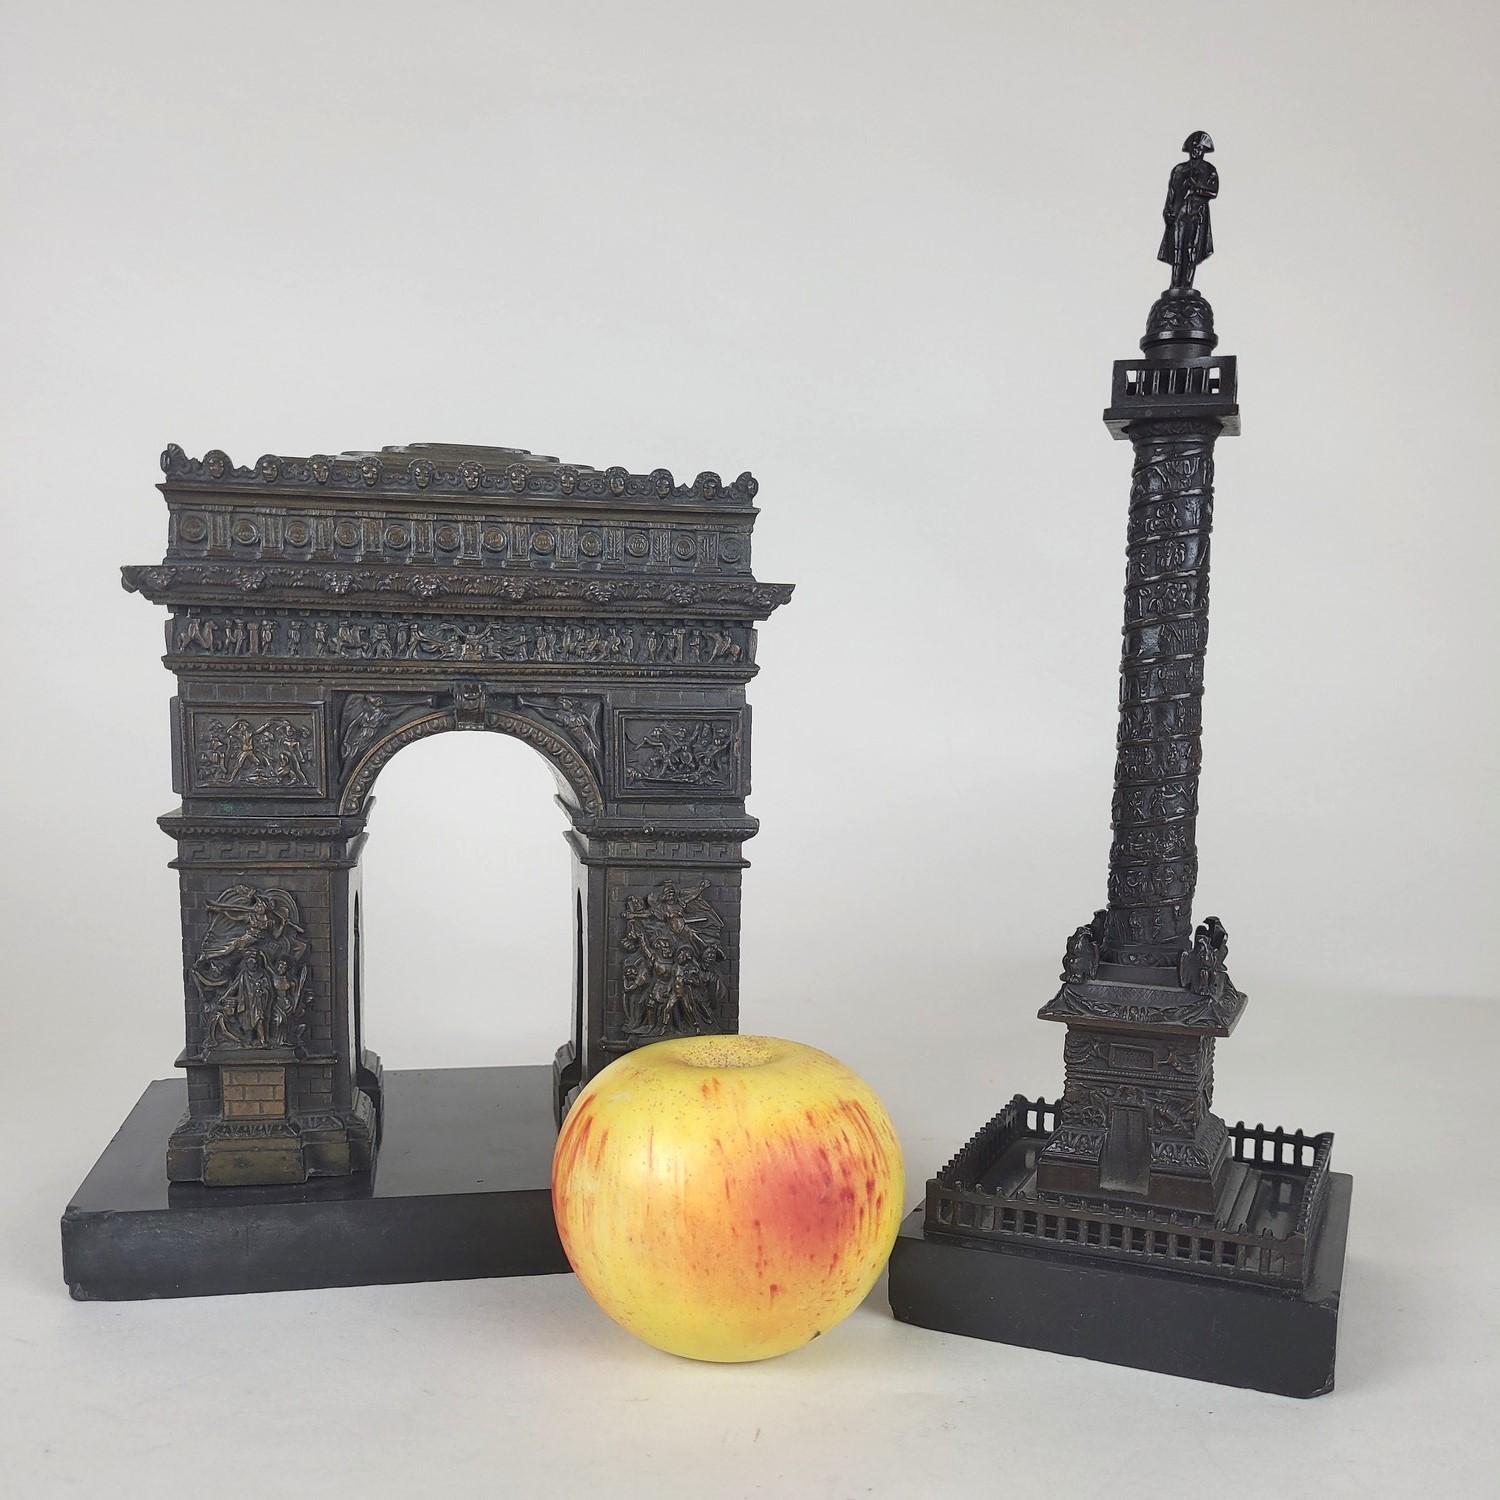 Bronze reduction with a brown patina, on a black marble base of 2 of the most emblematic monuments of Paris: Arc de Triomphe and Vendôme Column

The Arc de Triomphe was built on the initiative of Napoleon I, following the victory of Austerlitz, in